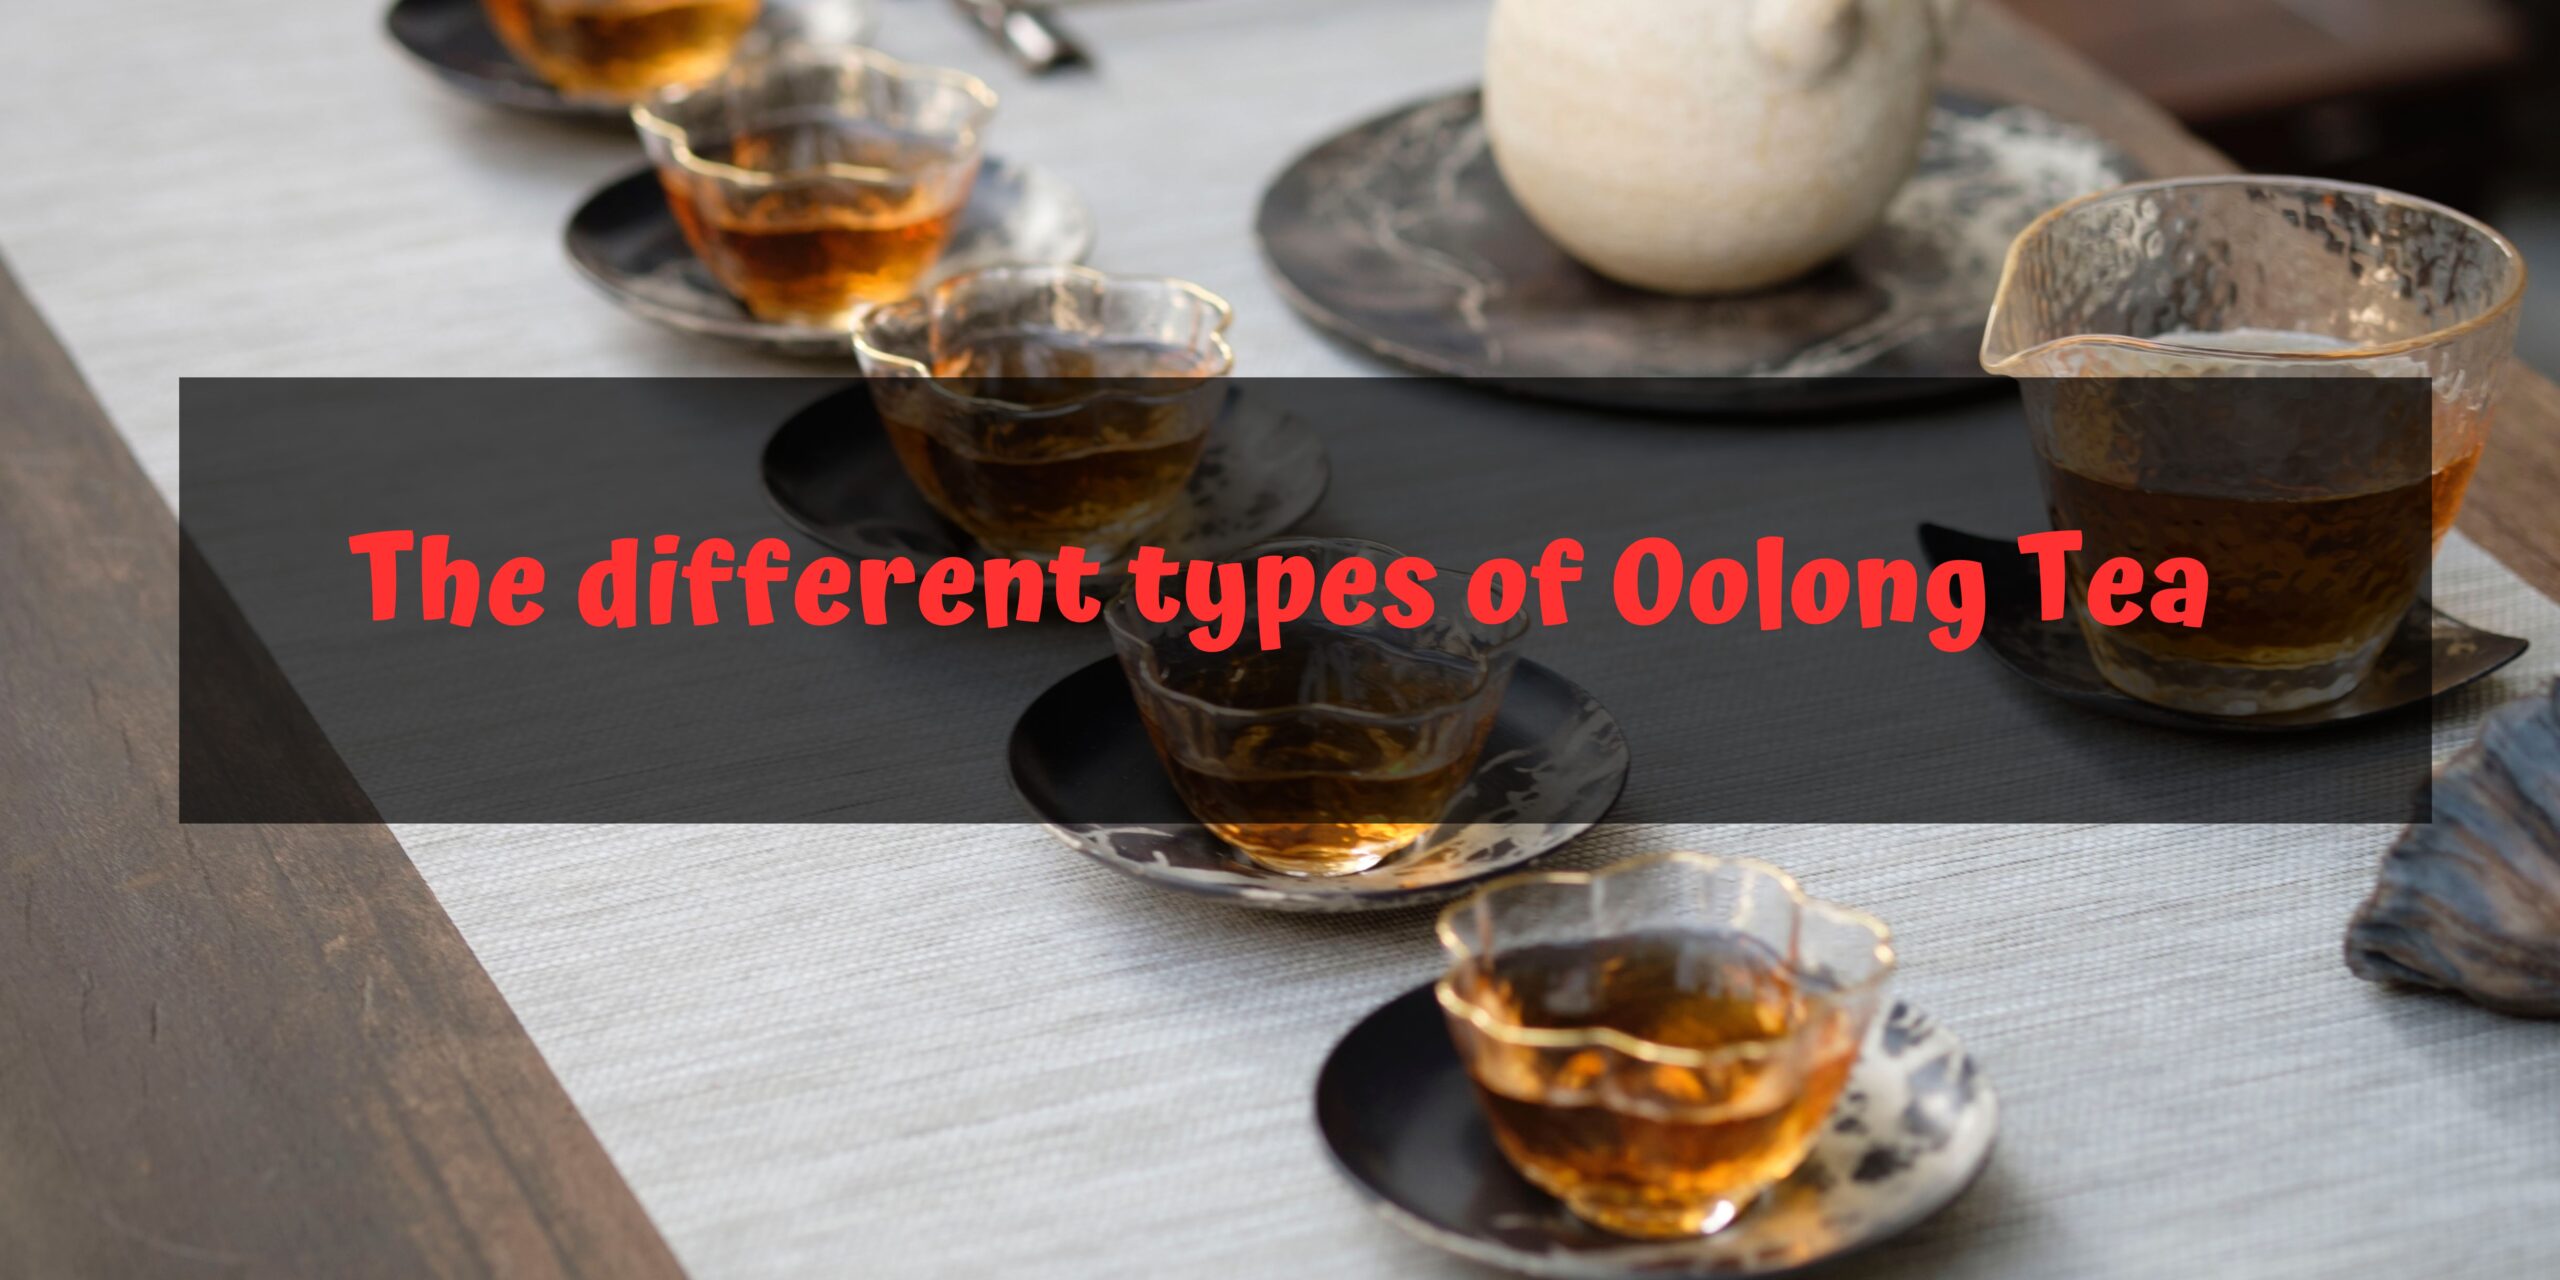 Different types of Oolong Tea